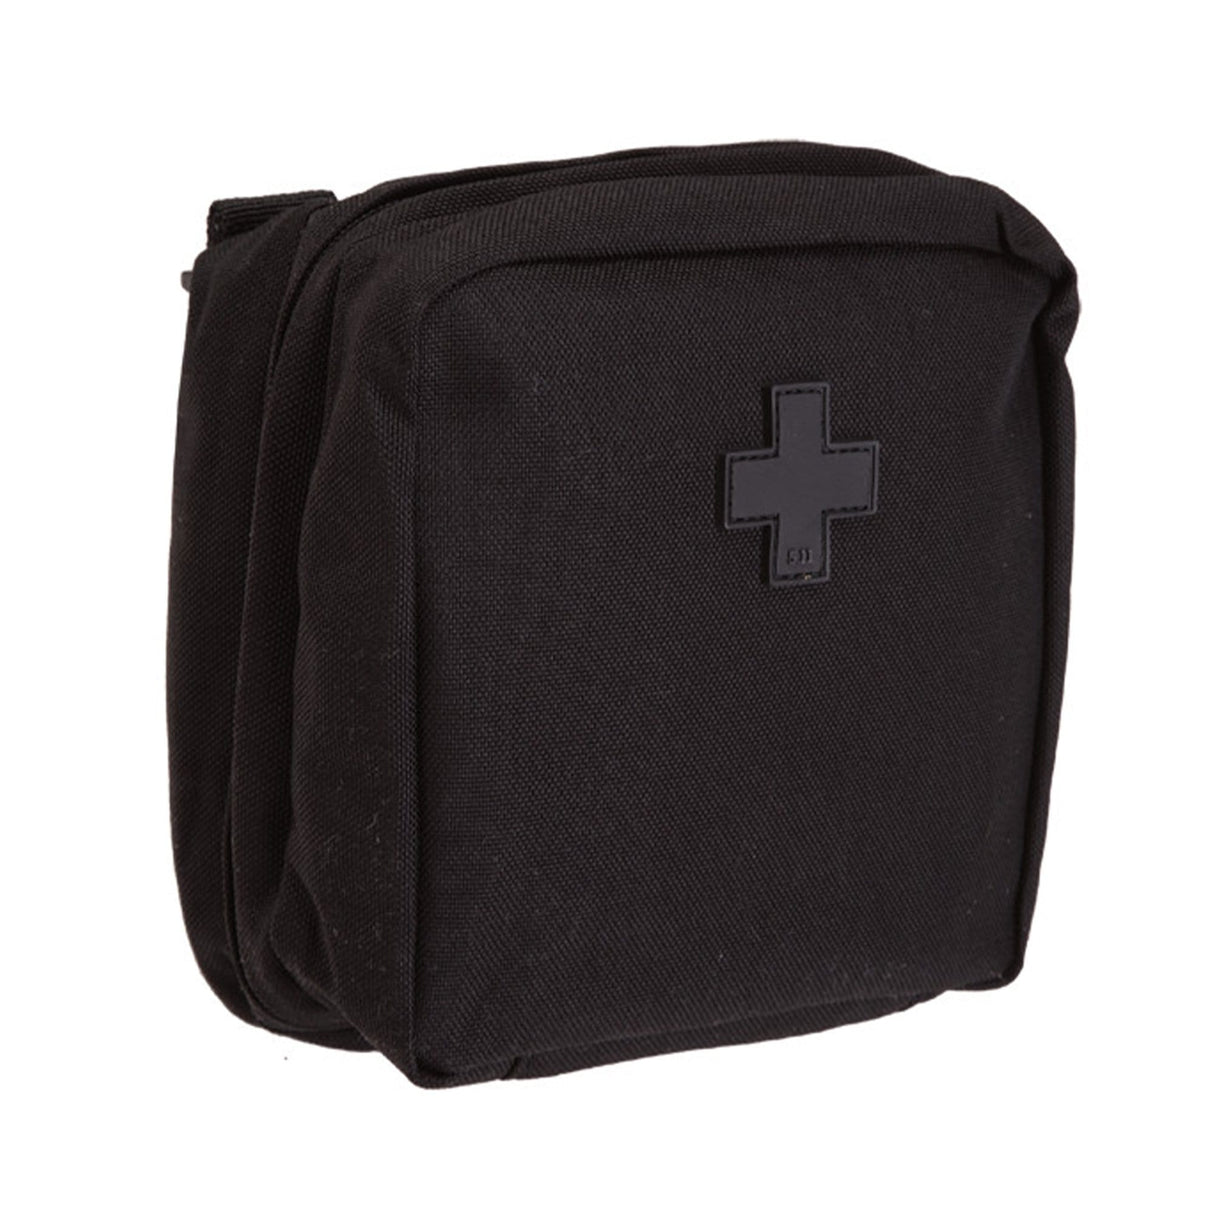 6 x 6 MED POUCH